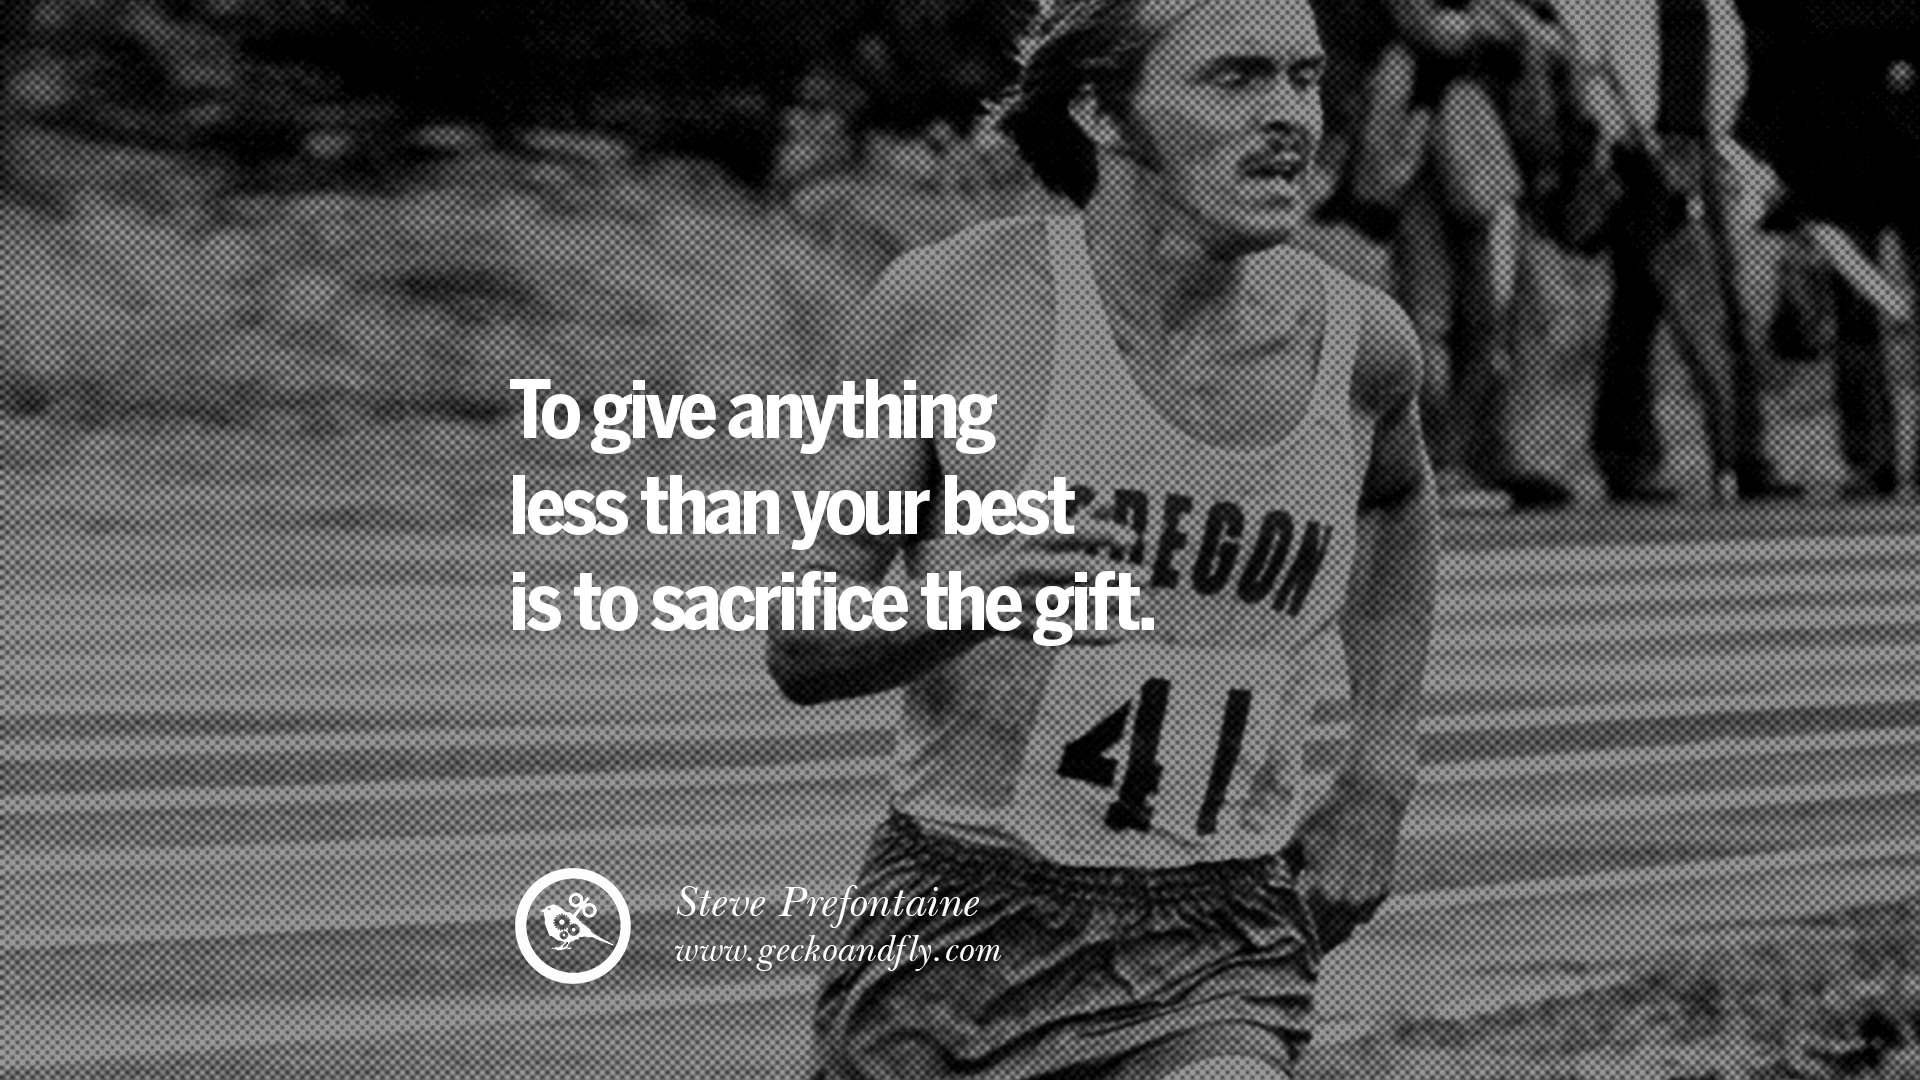 1920x1080 31 Inspirational Quotes By Olympic Athletes On The Spirit Of Sportsmanship  | GeckoandFly 2018